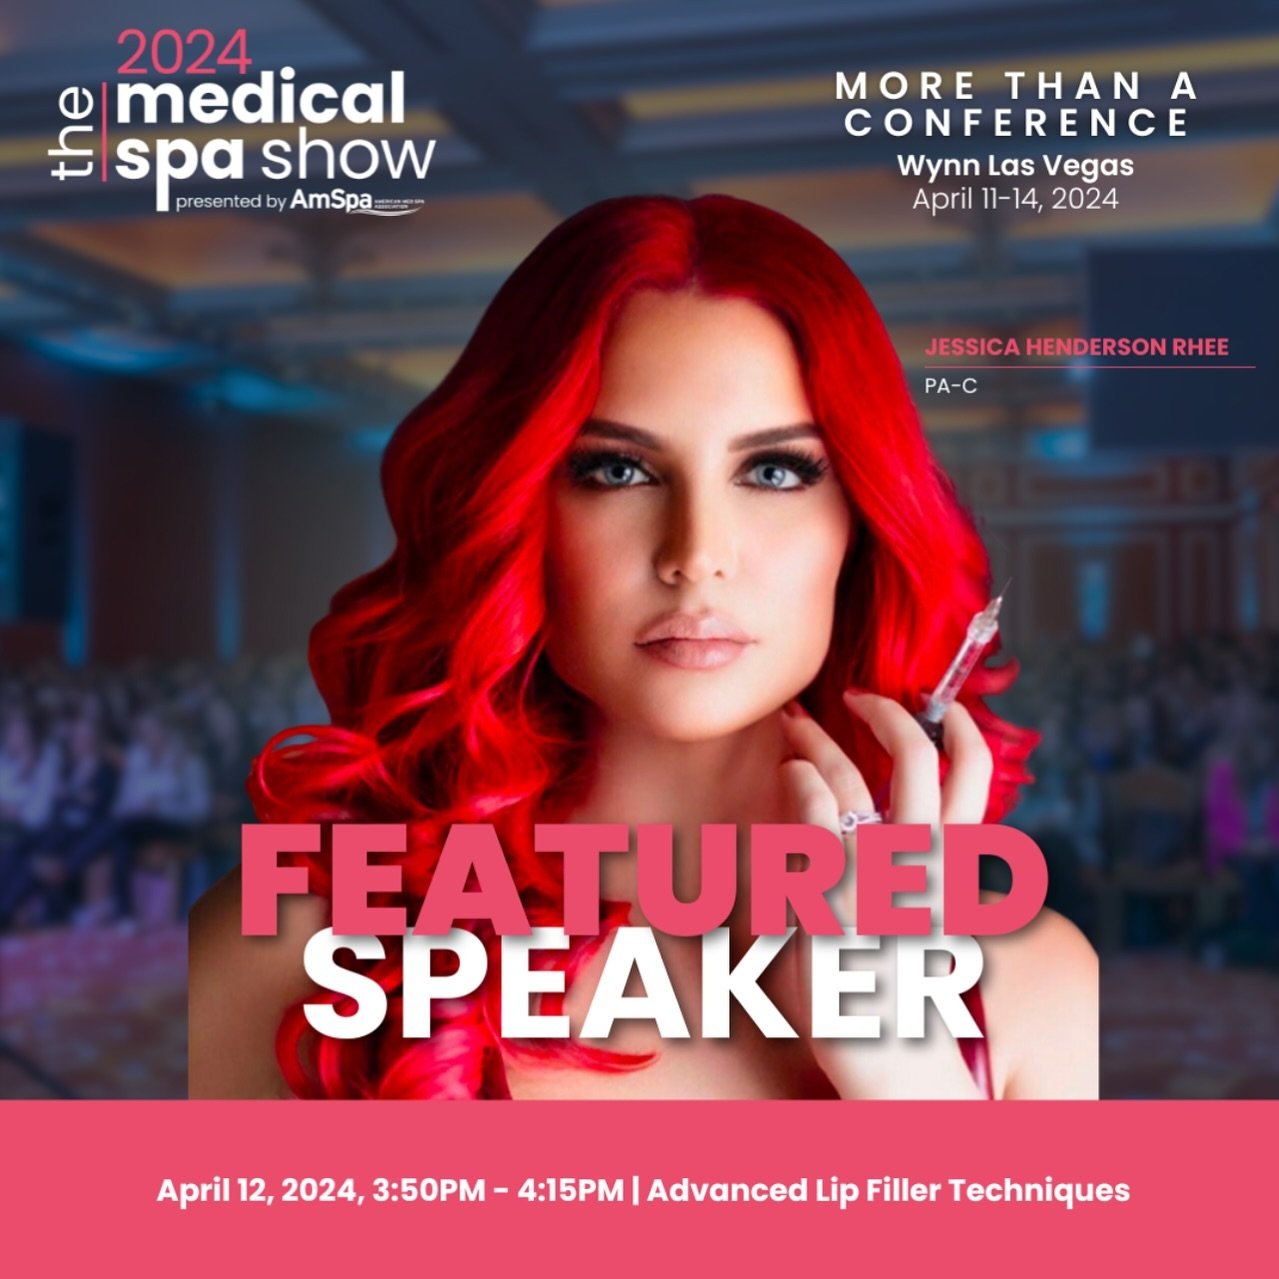 Here we go!!!!! 🤩🤩🤩. I&rsquo;m in Vegas getting ready for AMSPA!  Comment or DM me if you&rsquo;re here!  I&rsquo;ll be speaking Friday on Advanced Lip Techniques as well as correction and dissolver techniques! Come see me! 😍😍😍

@amspa_american